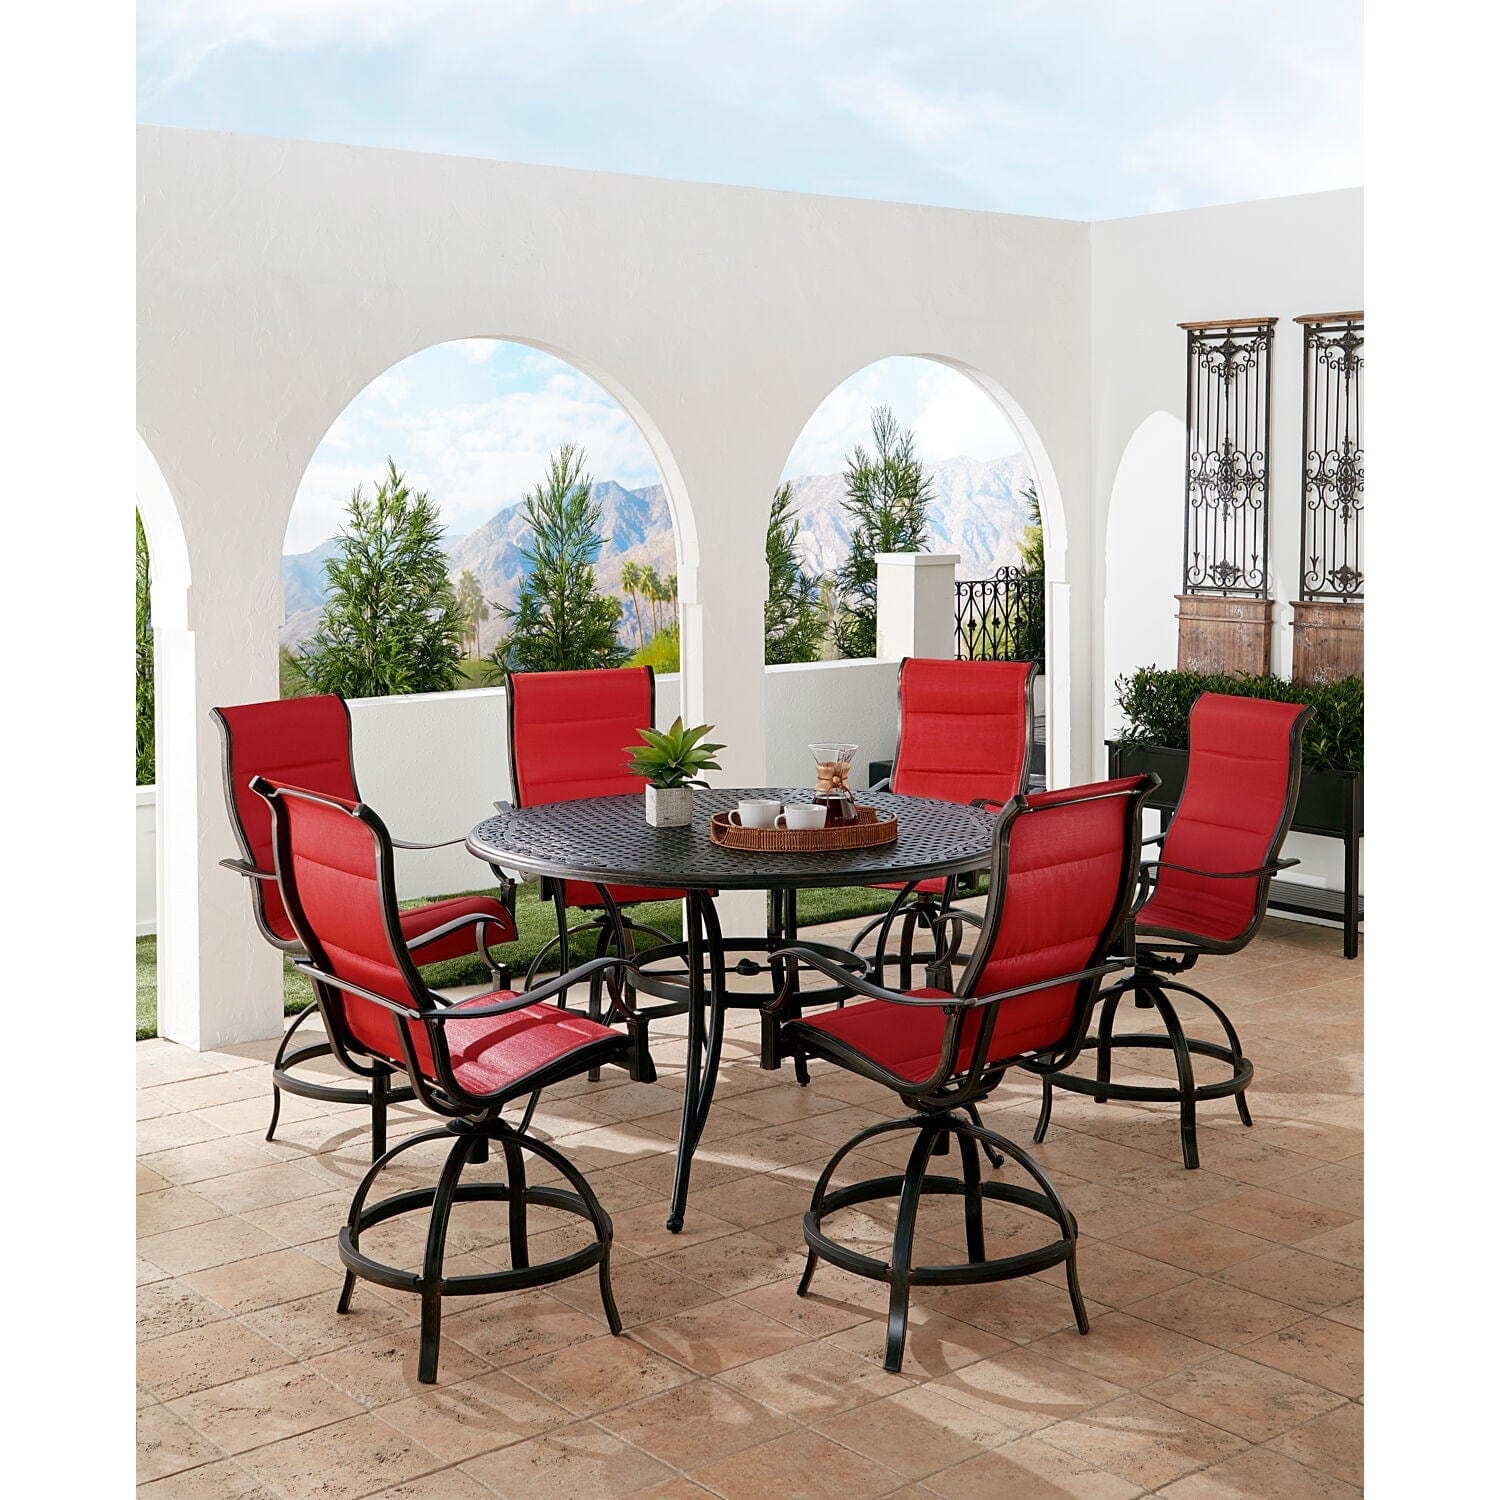 Hanover Outdoor Dining Set Hanover Traditions 7-Piece High-Dining Set in Red with 6 Padded Swivel Counter-Height Chairs and 56-in. Cast-top Table